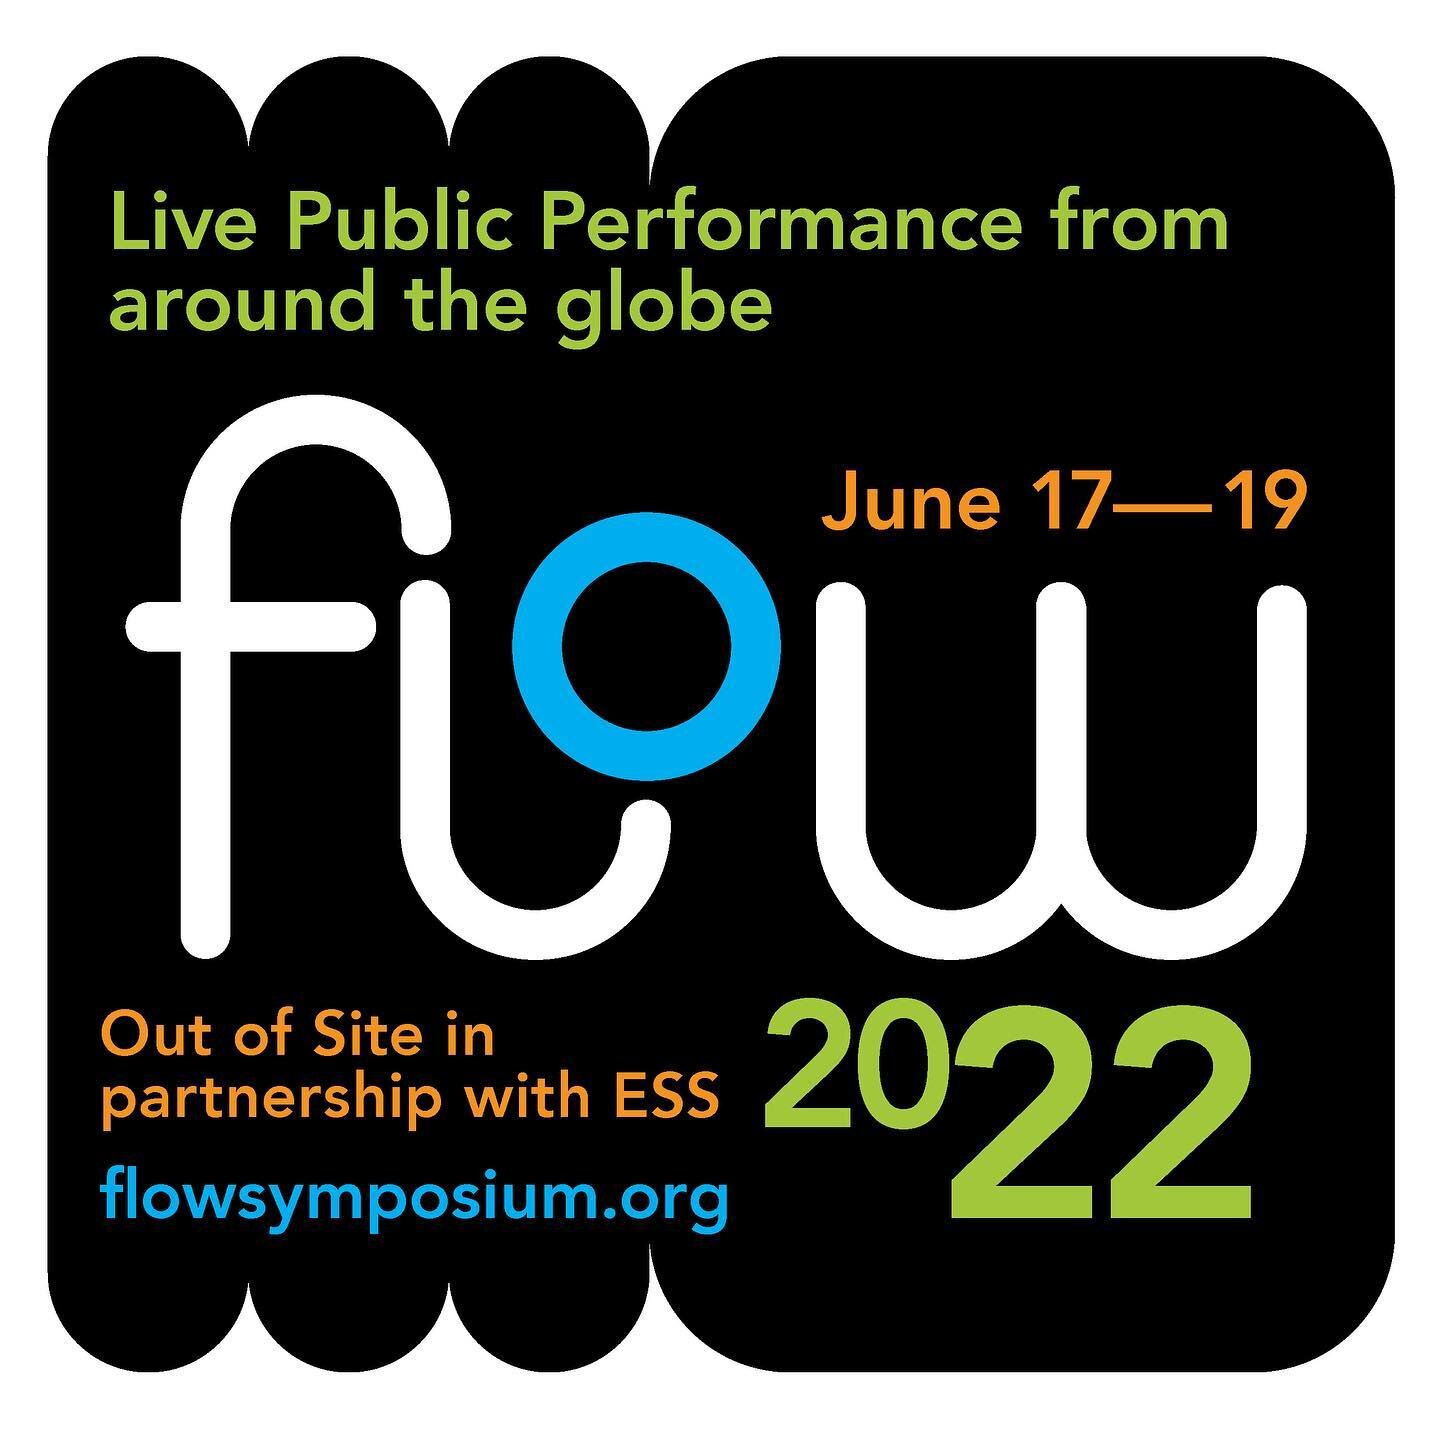 Tonite @outofsite_chi starts a weekend long program called Live Flow presenting live public performances from around the globe. Please find the links on the front page of the Flow symposium website or my website in the bio. We hope you can join us fr